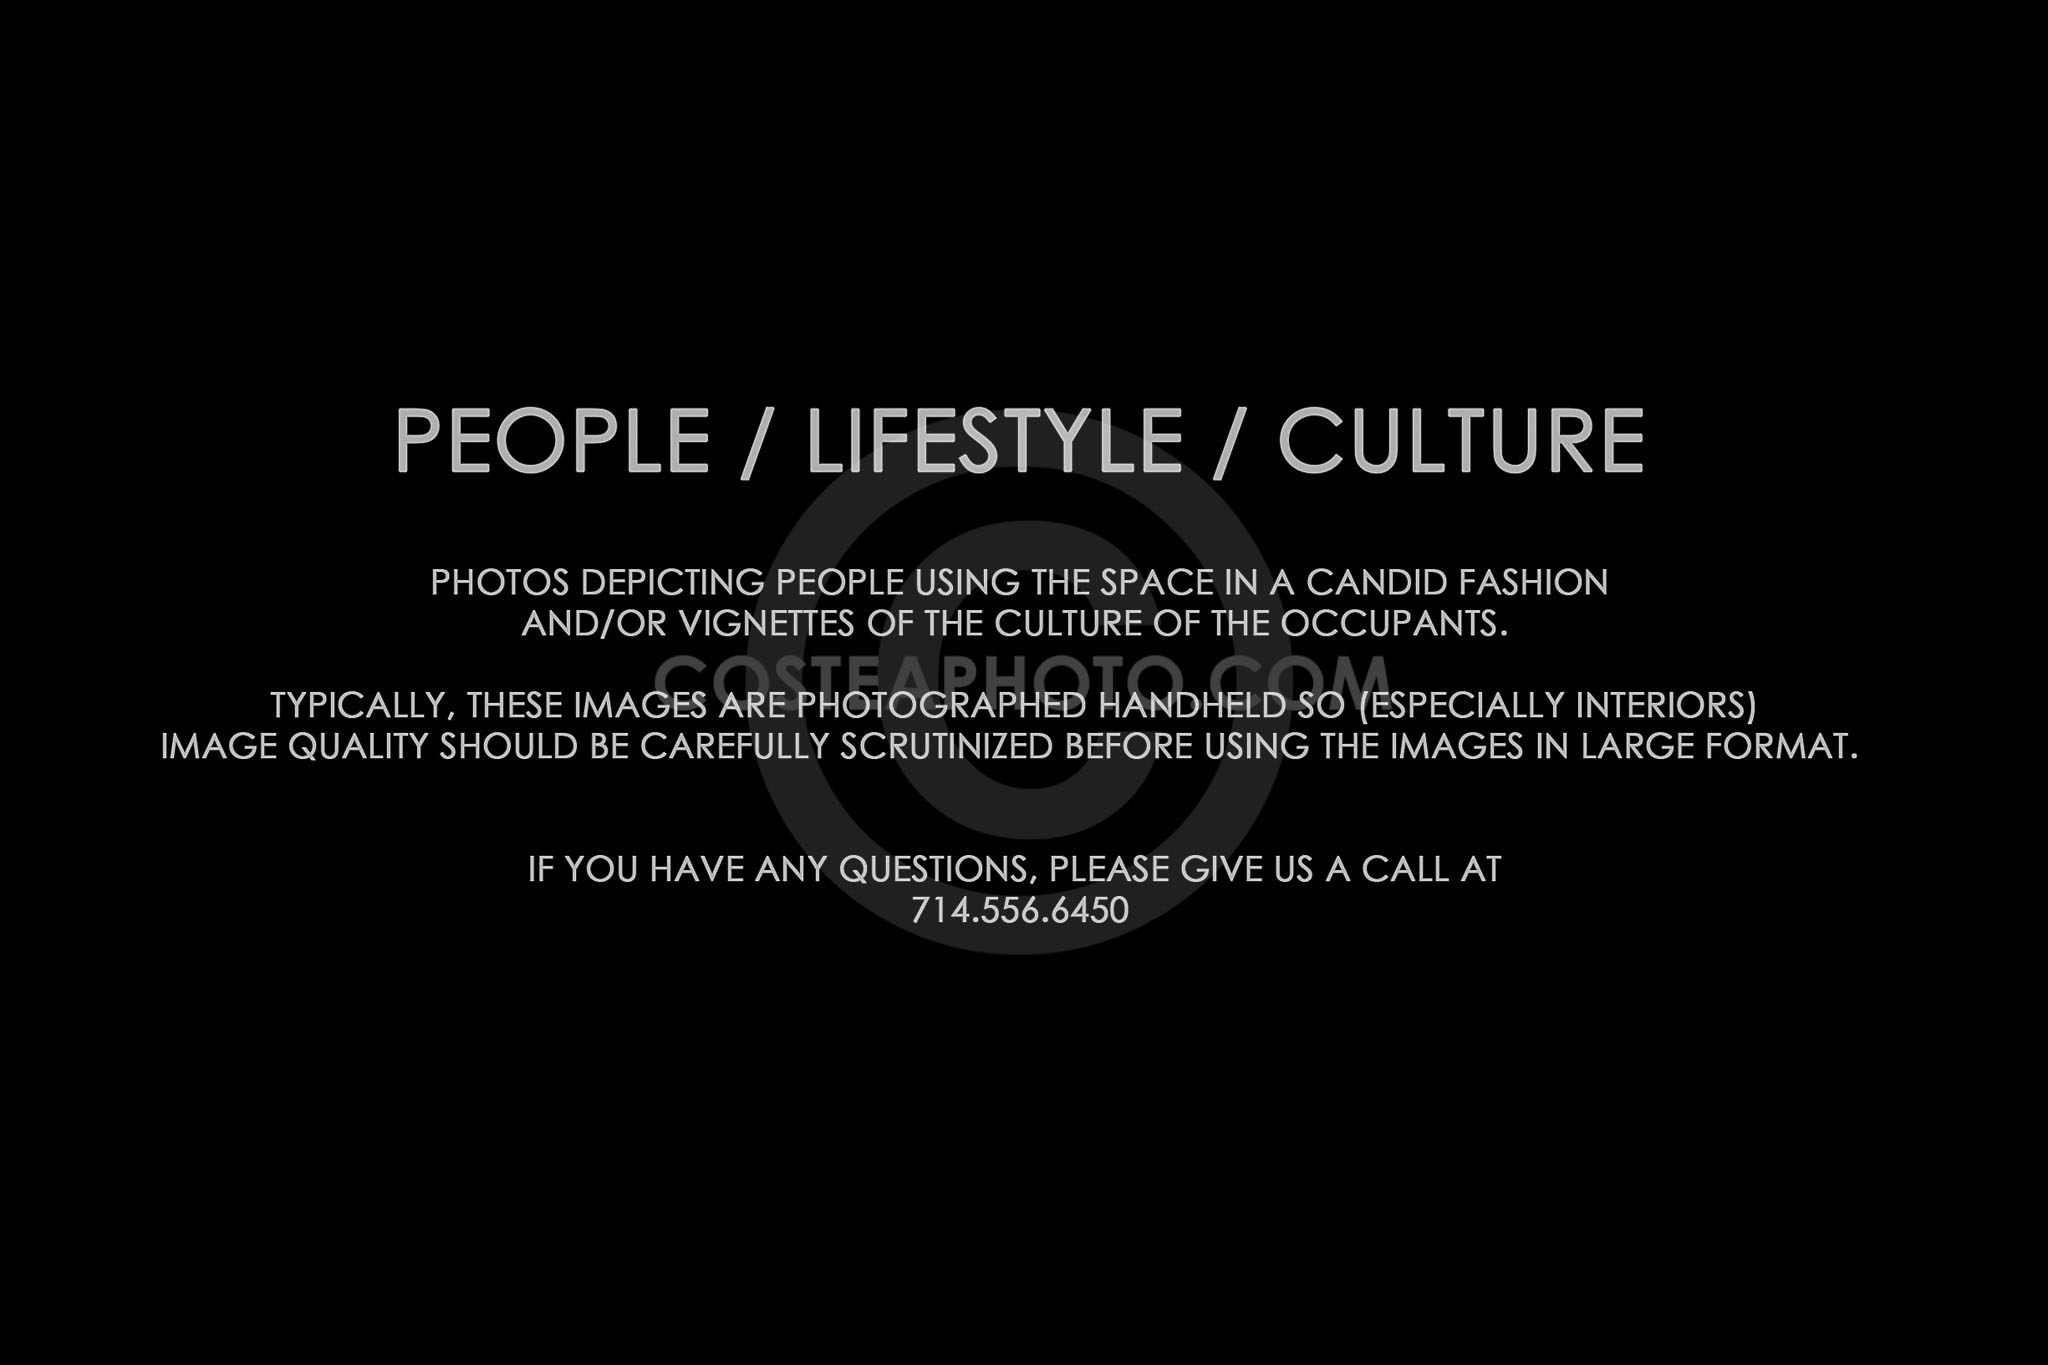 (285) TITLE PAGE - PEOPLE LIFESTYLE